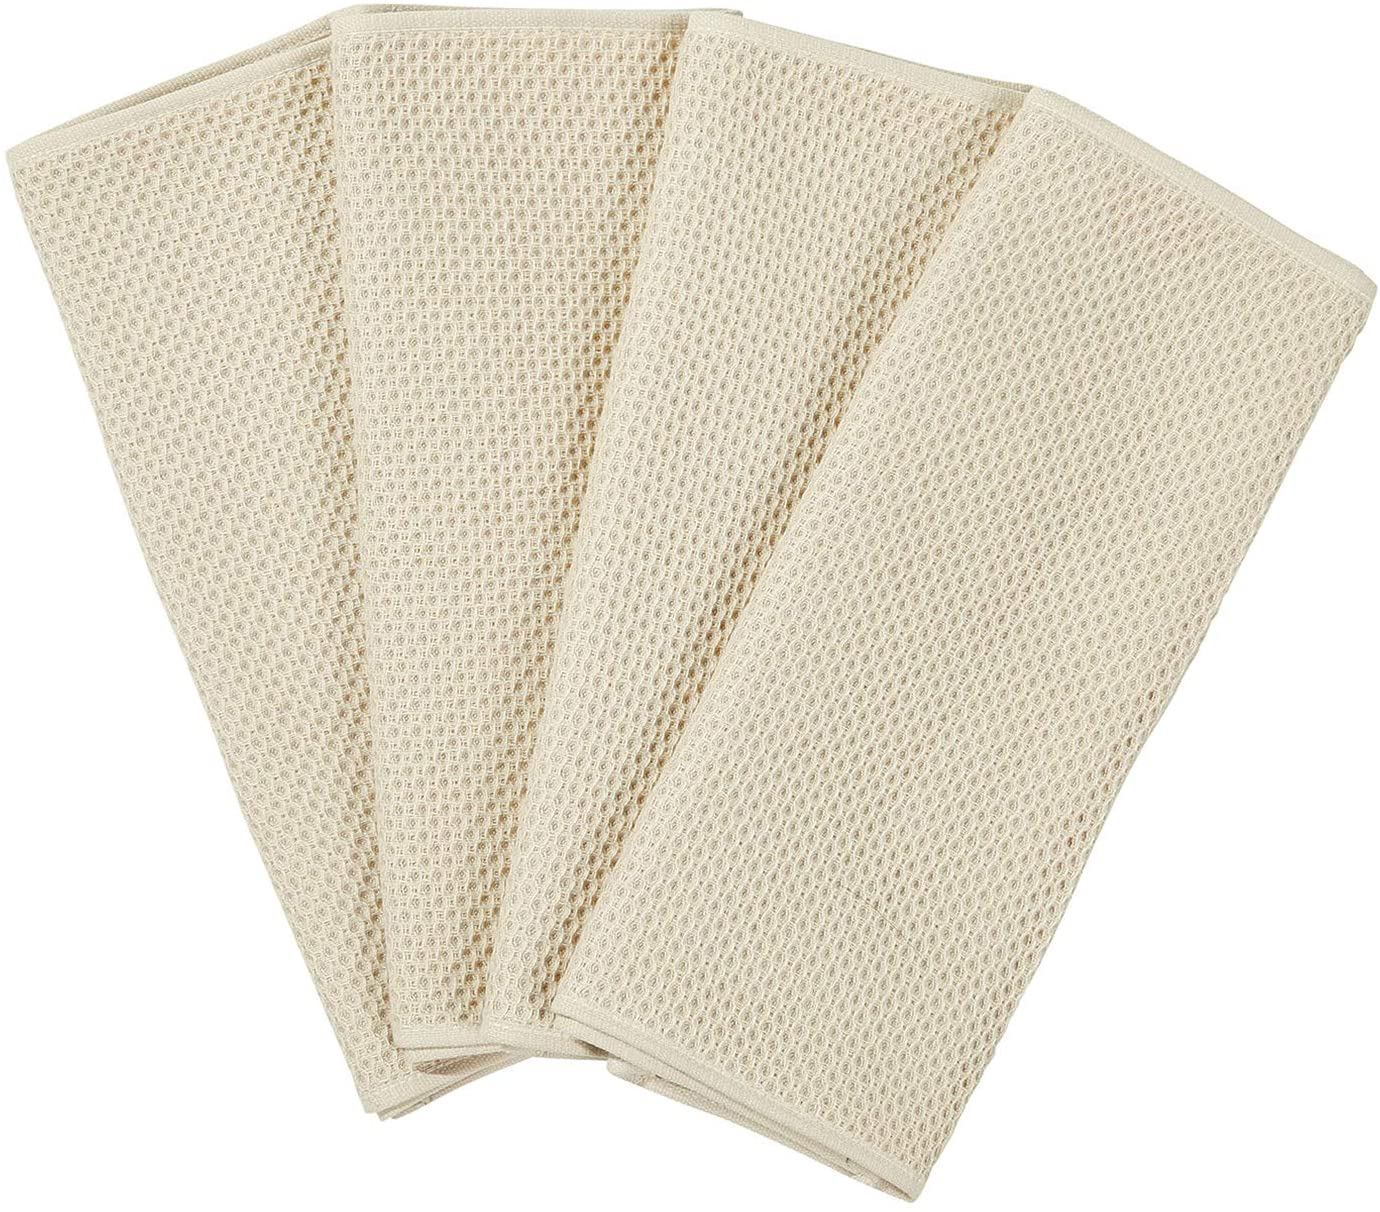 Homaxy 100% Cotton Waffle Weave Kitchen Dish Cloths, Ultra Soft Absorbent Quick Drying Dish Towels, 12x12 Inches, 6-Pack, Beige